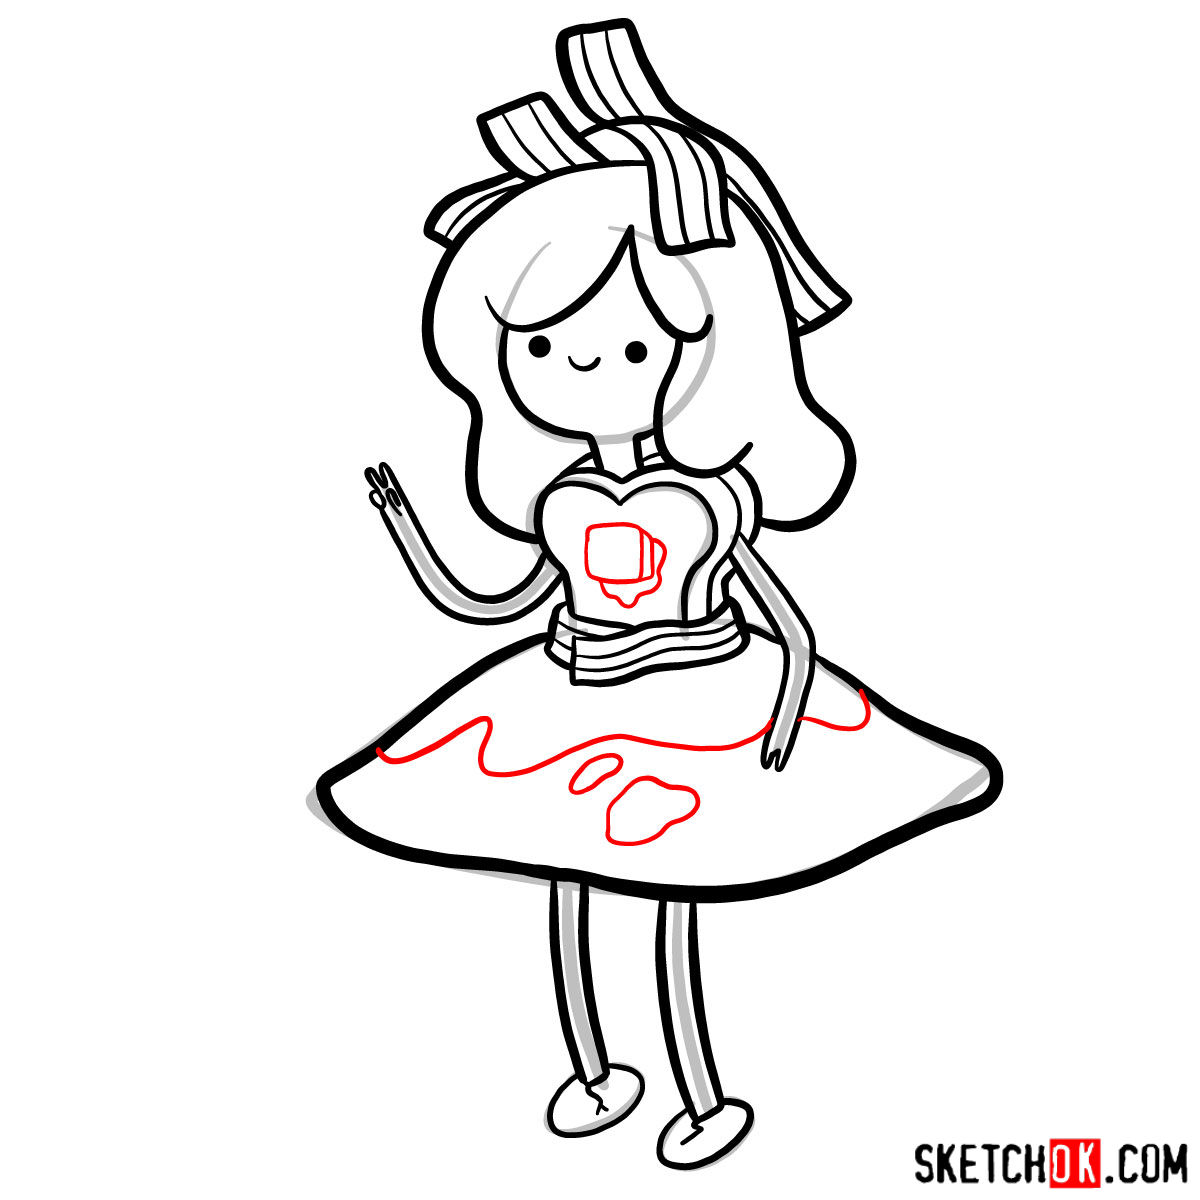 How to draw Breakfast Princess from Adventure Time - step 12